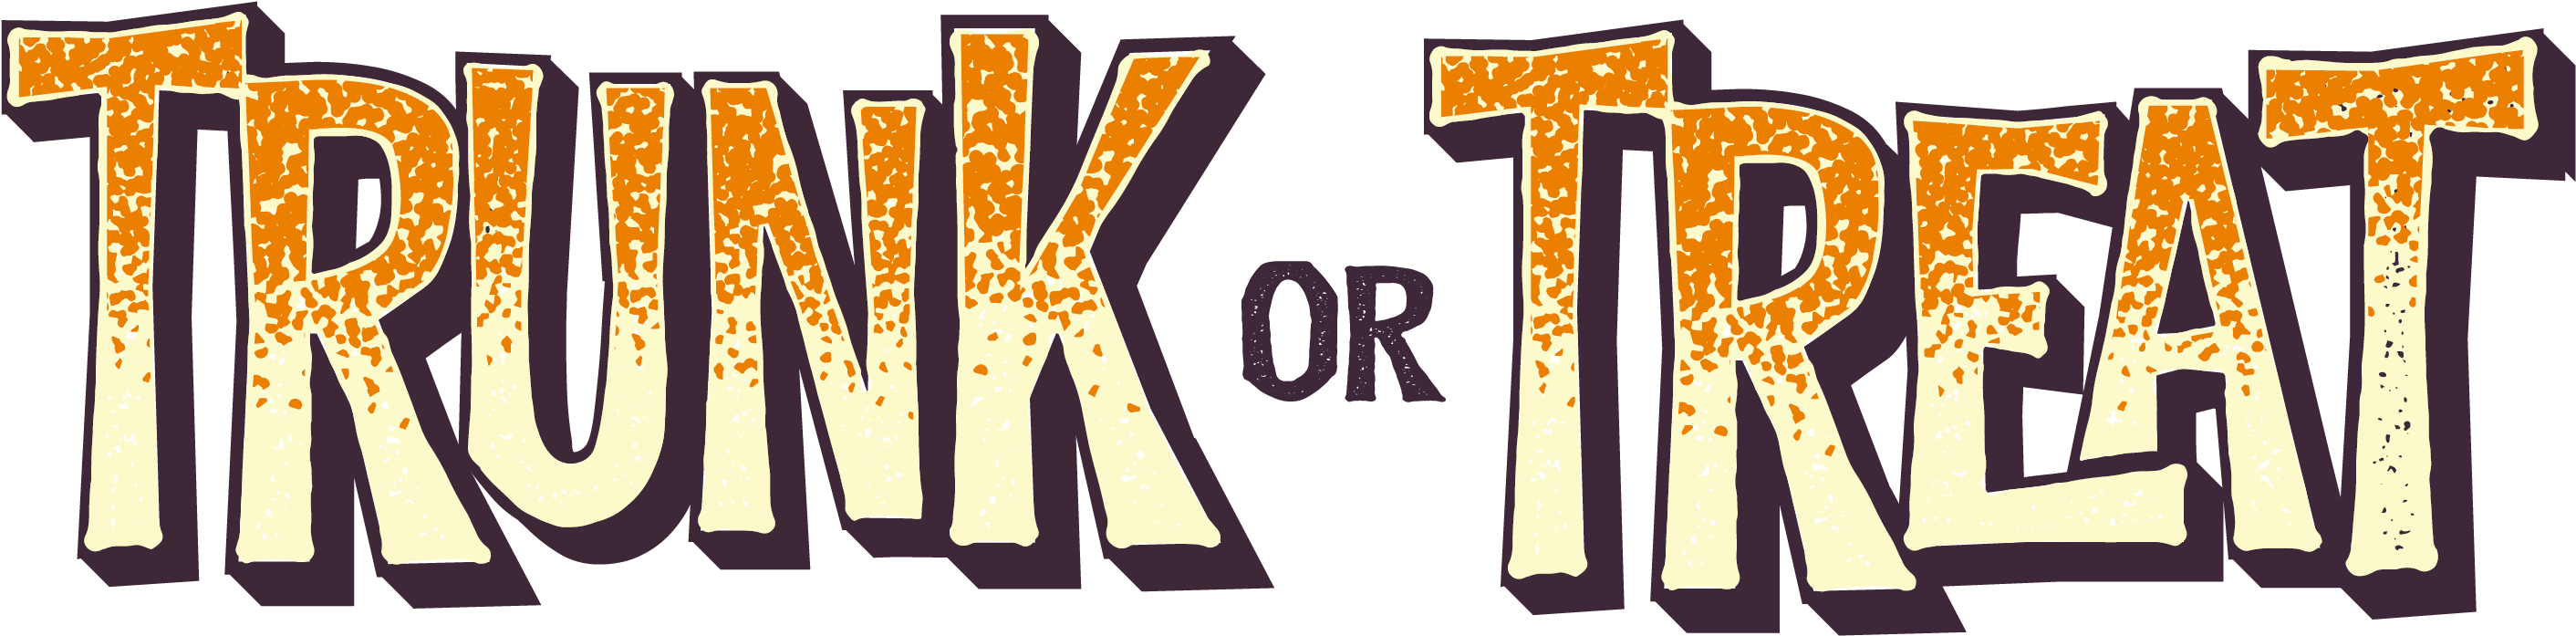 Trunk Or Treat 2018 Trunk Or Treat Color Horizontal - Trunk Or Treat 2018 Trunk Or Treat Color Horizontal (3000x900)